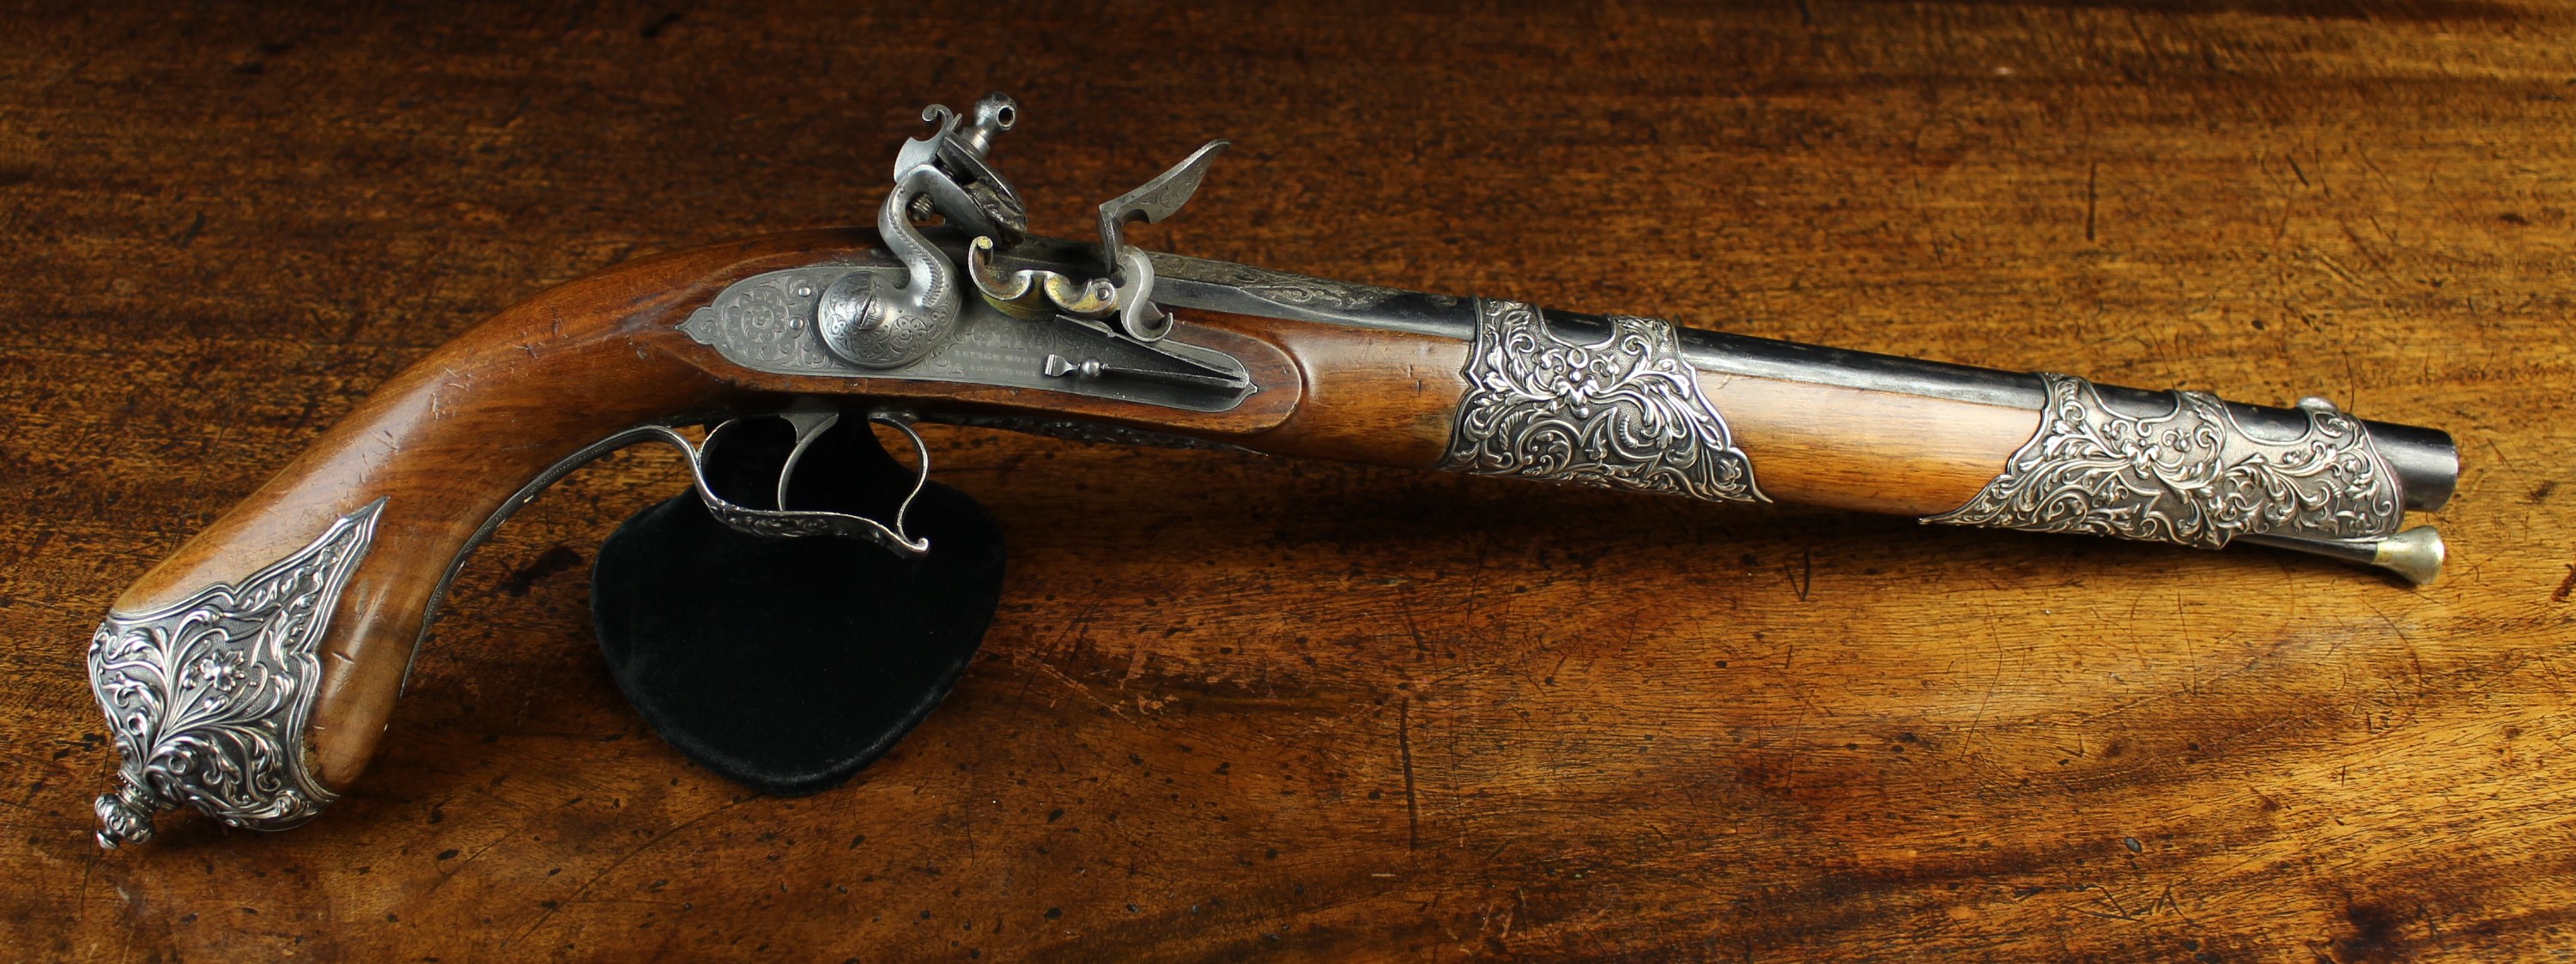 A Large Early 19th Century French Flintlock Pistol made for the North African Market.